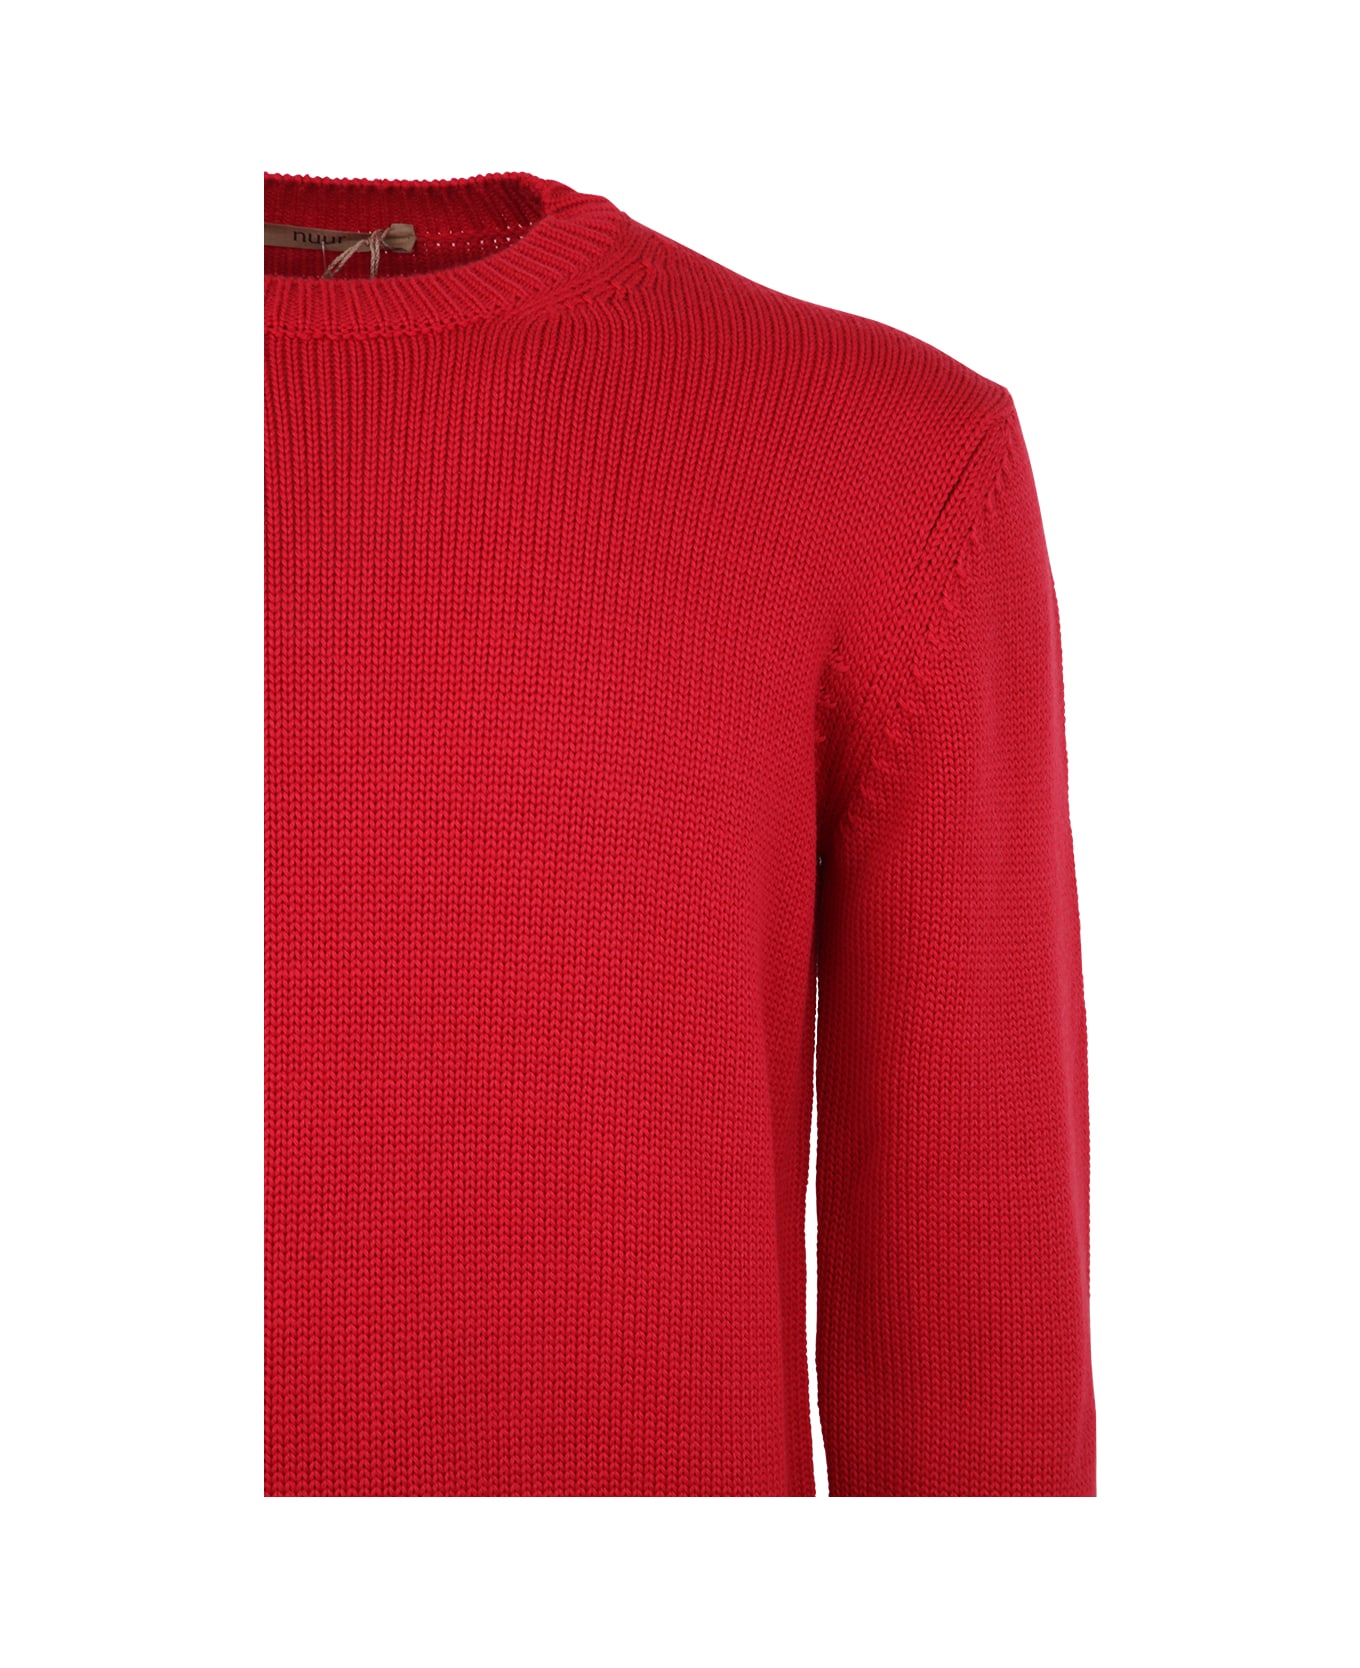 Nuur Long Sleeve Crew Neck Sweater - Red